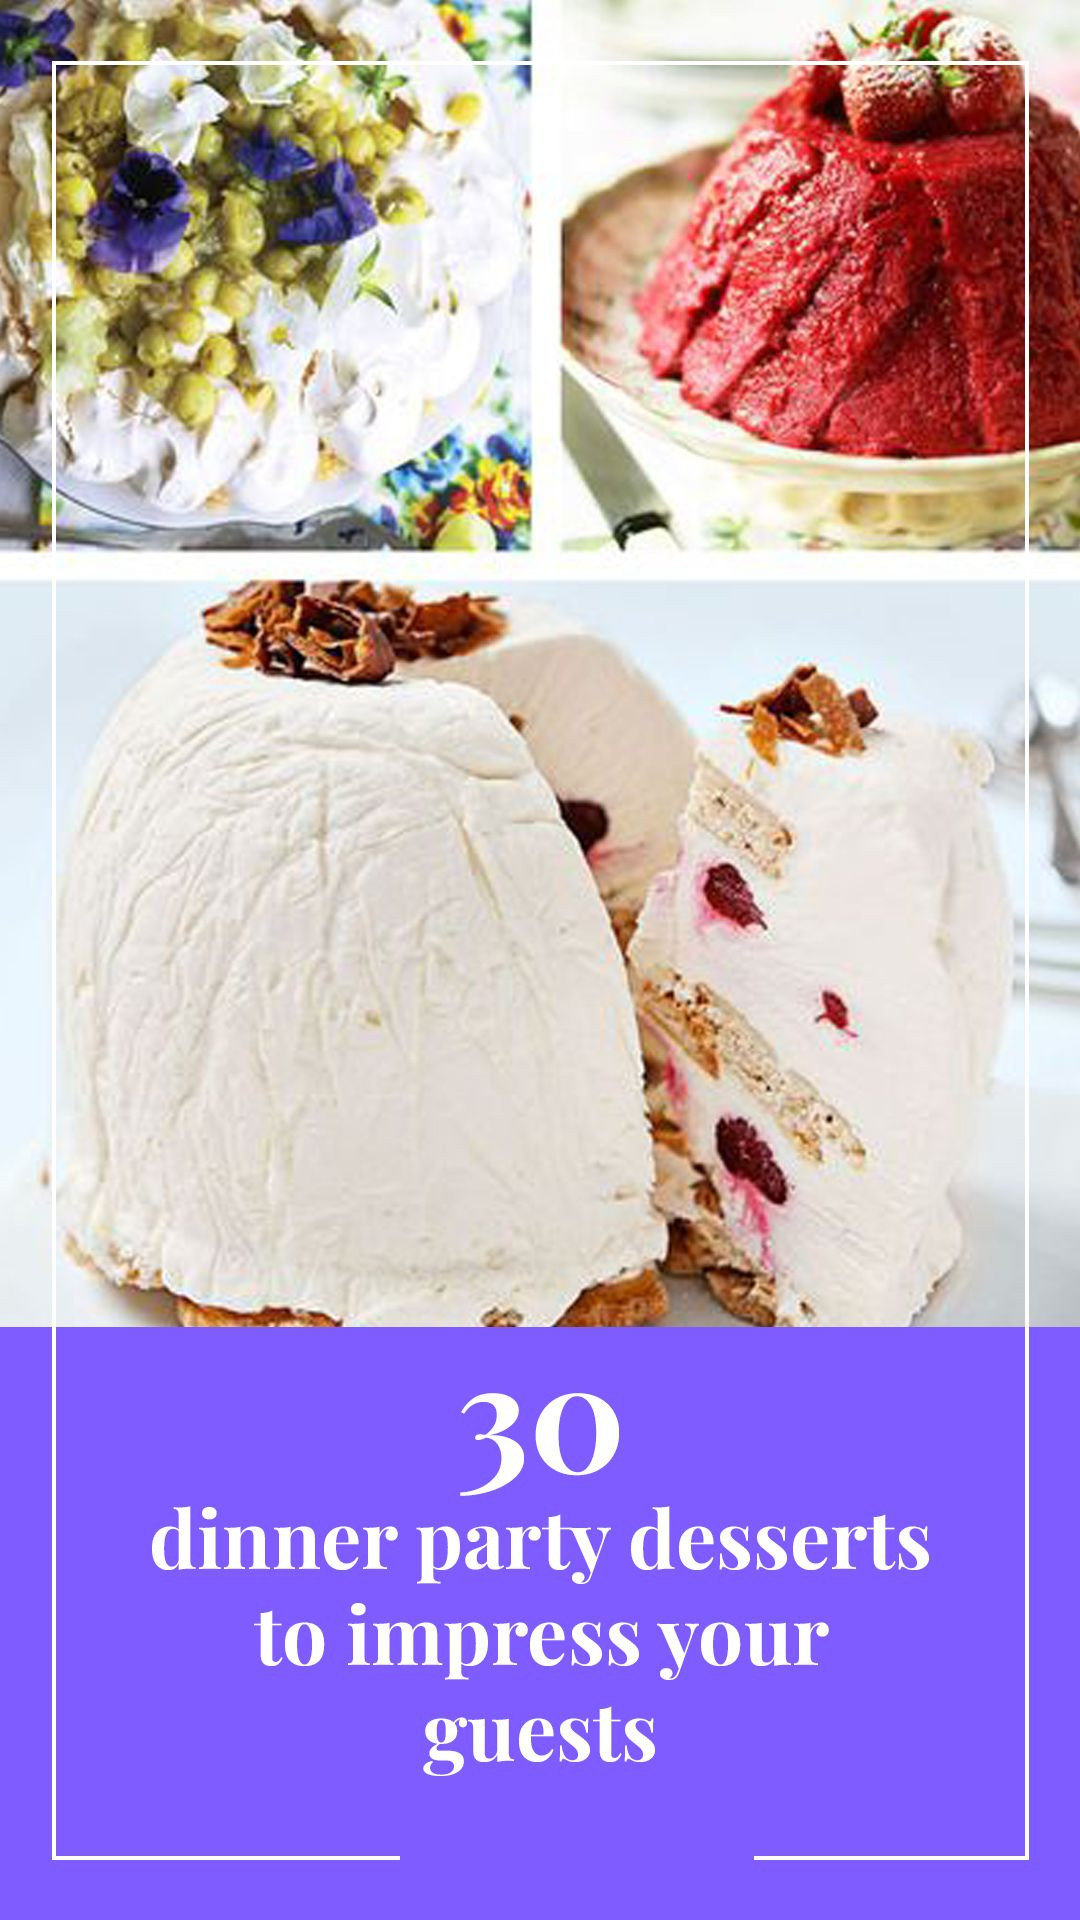 Dinner Party Desserts To Make Ahead
 30 dinner party desserts to impress your guests